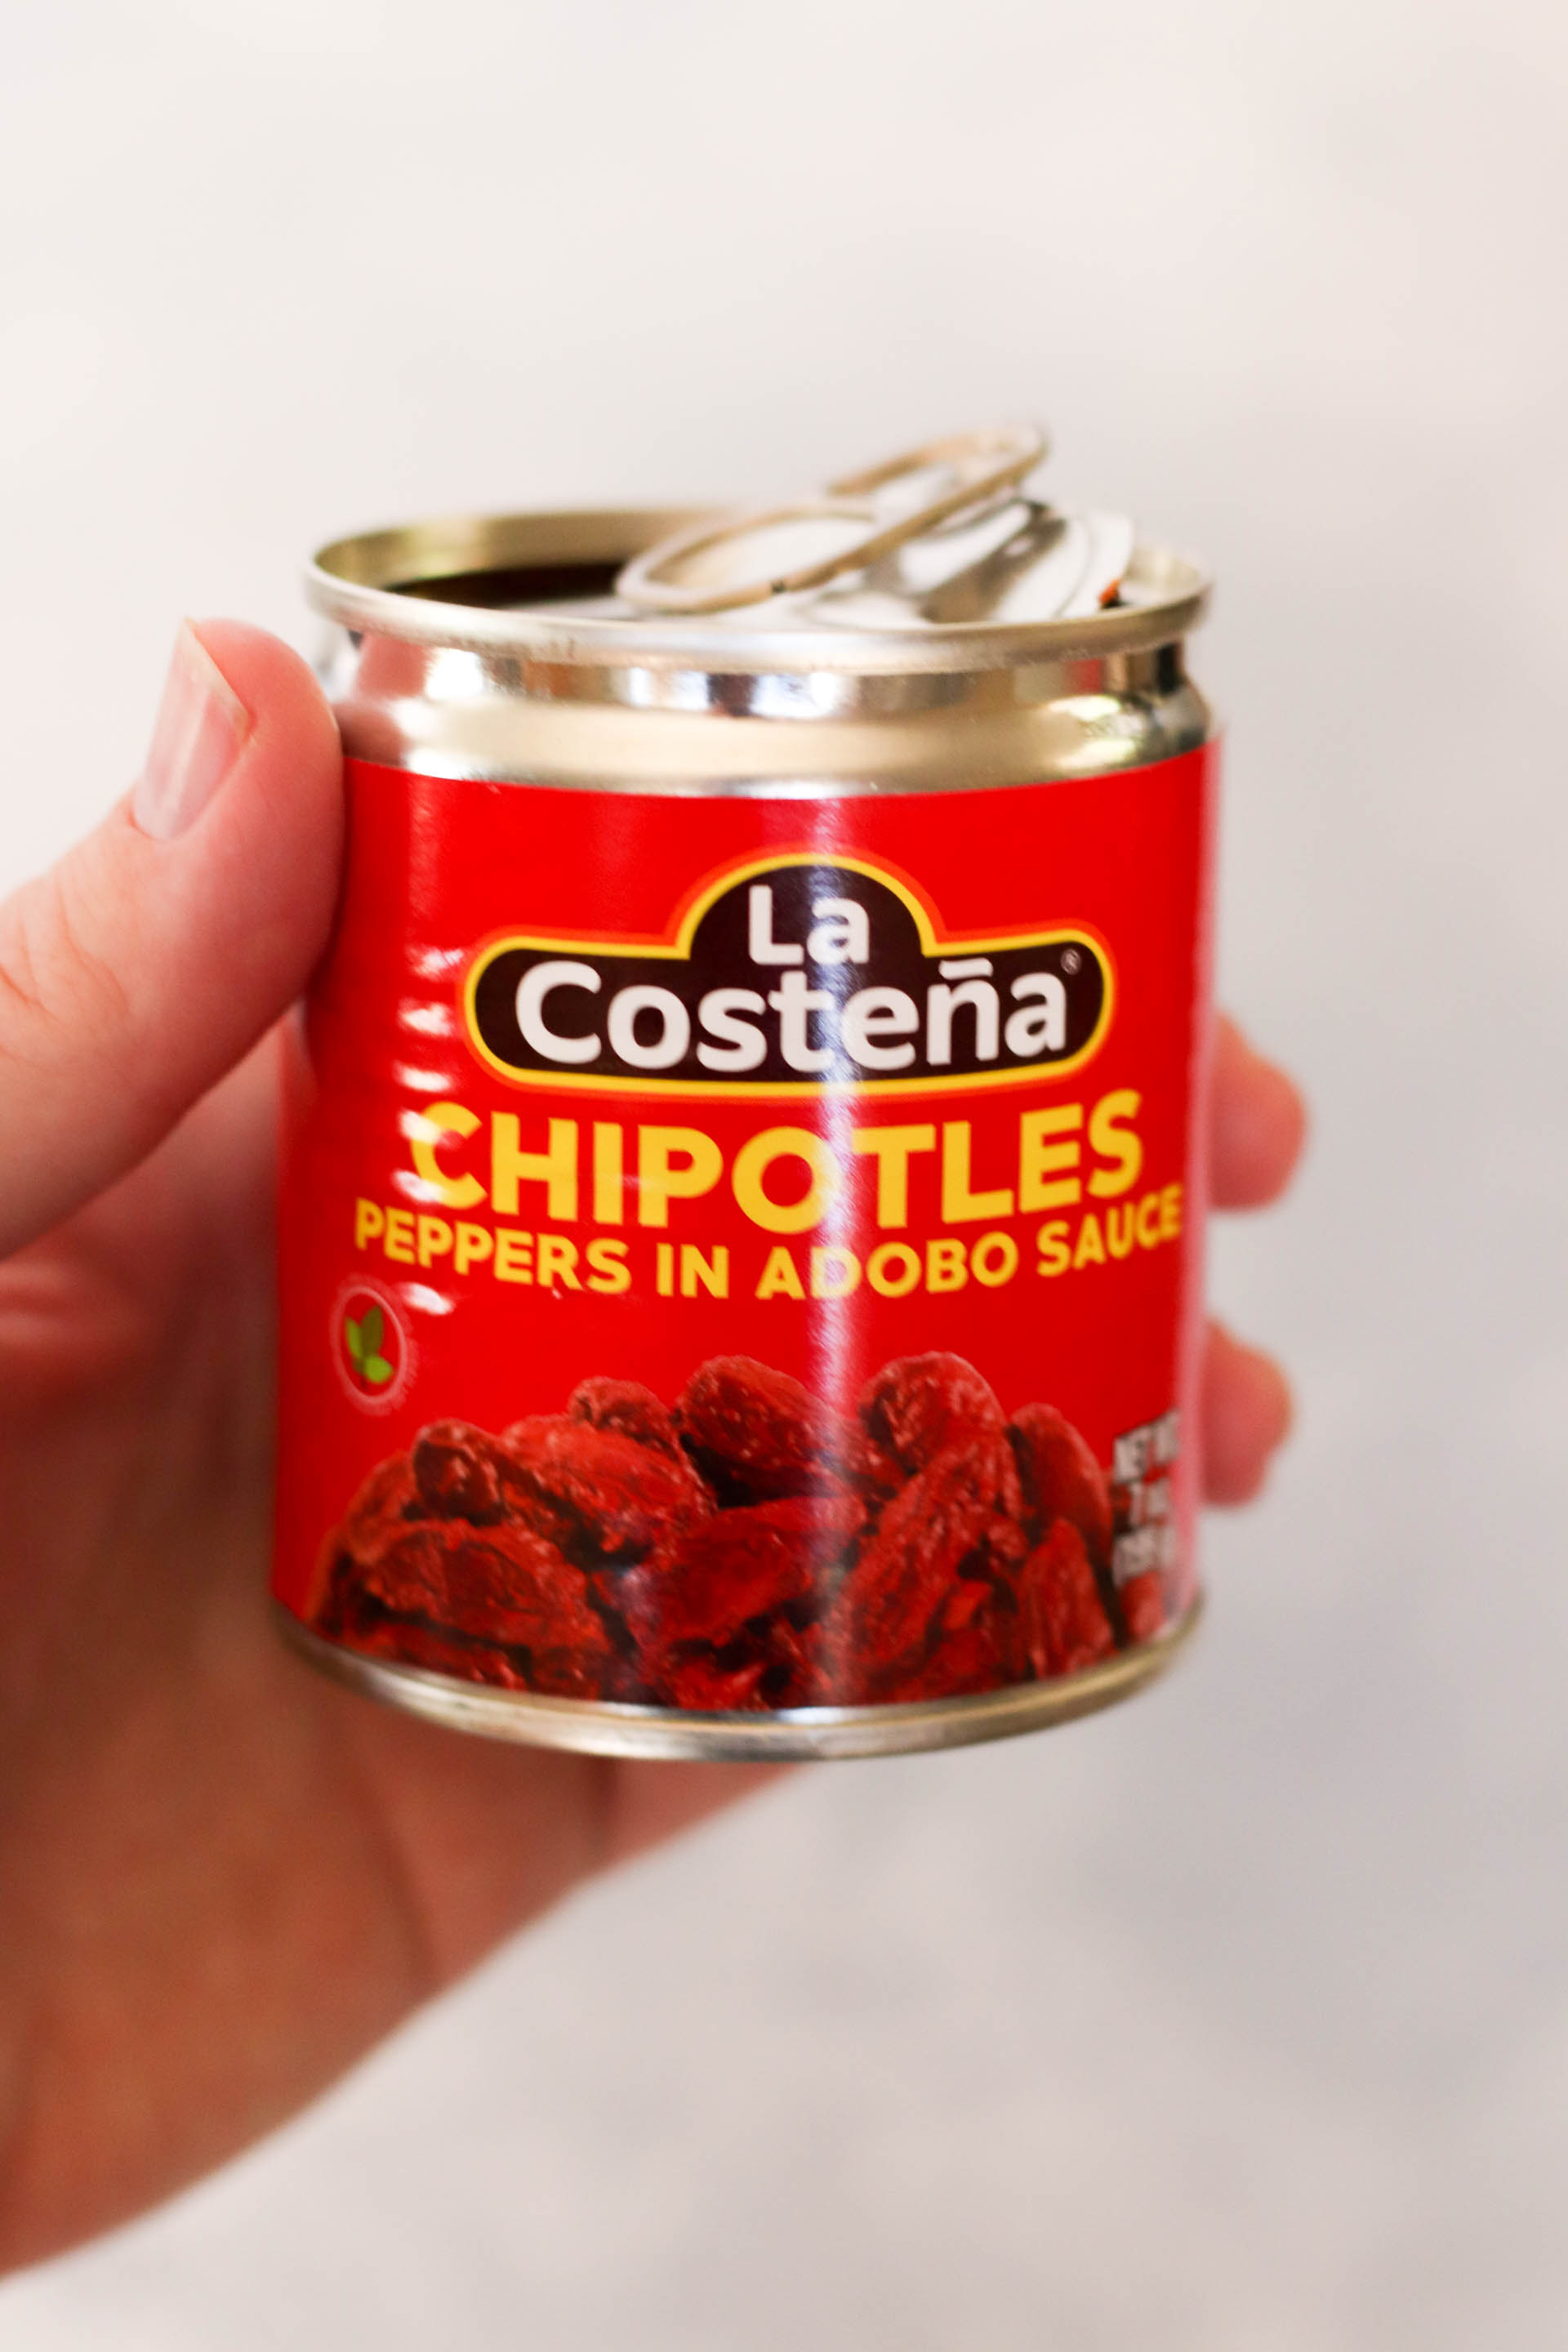 Can of chipotles in adobo sauce